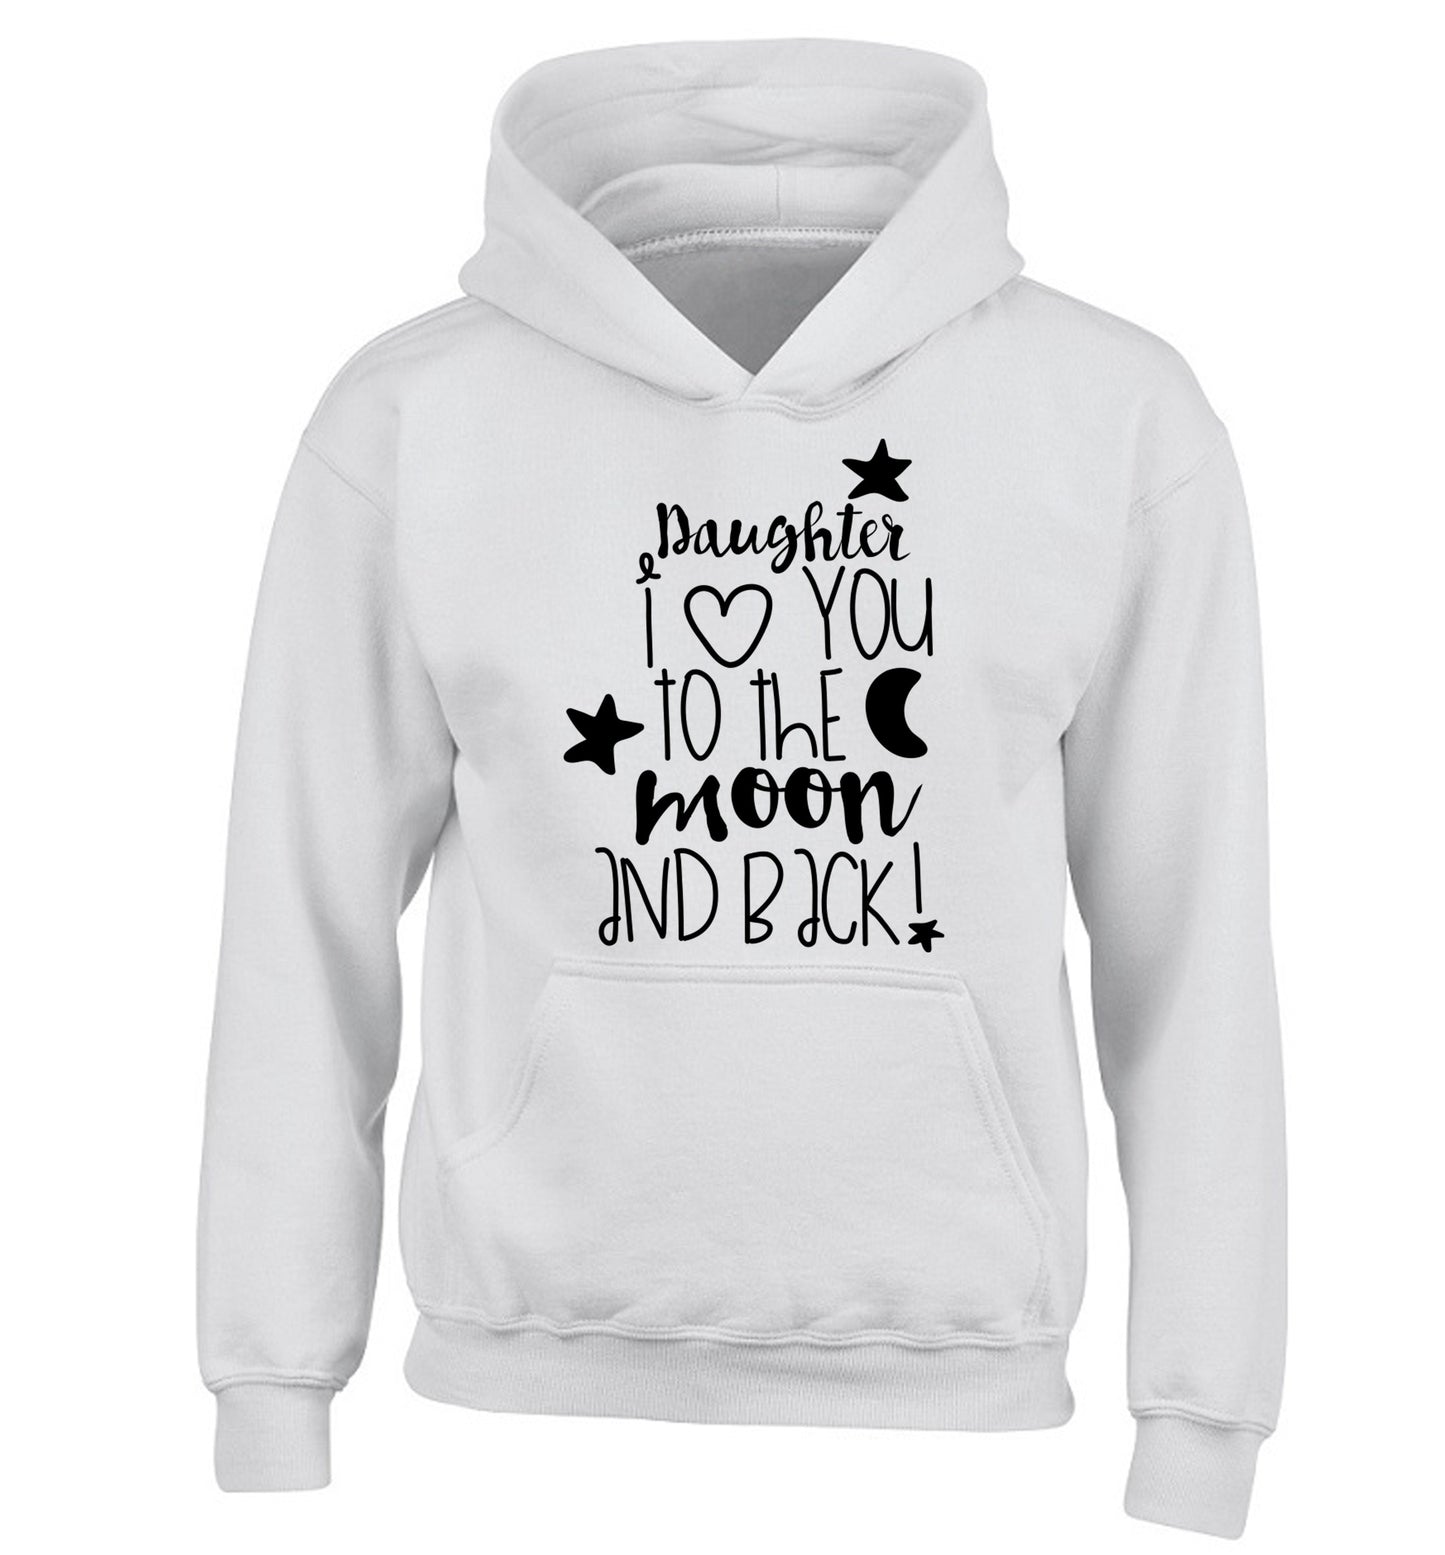 Daughter I love you to the moon and back children's white hoodie 12-14 Years